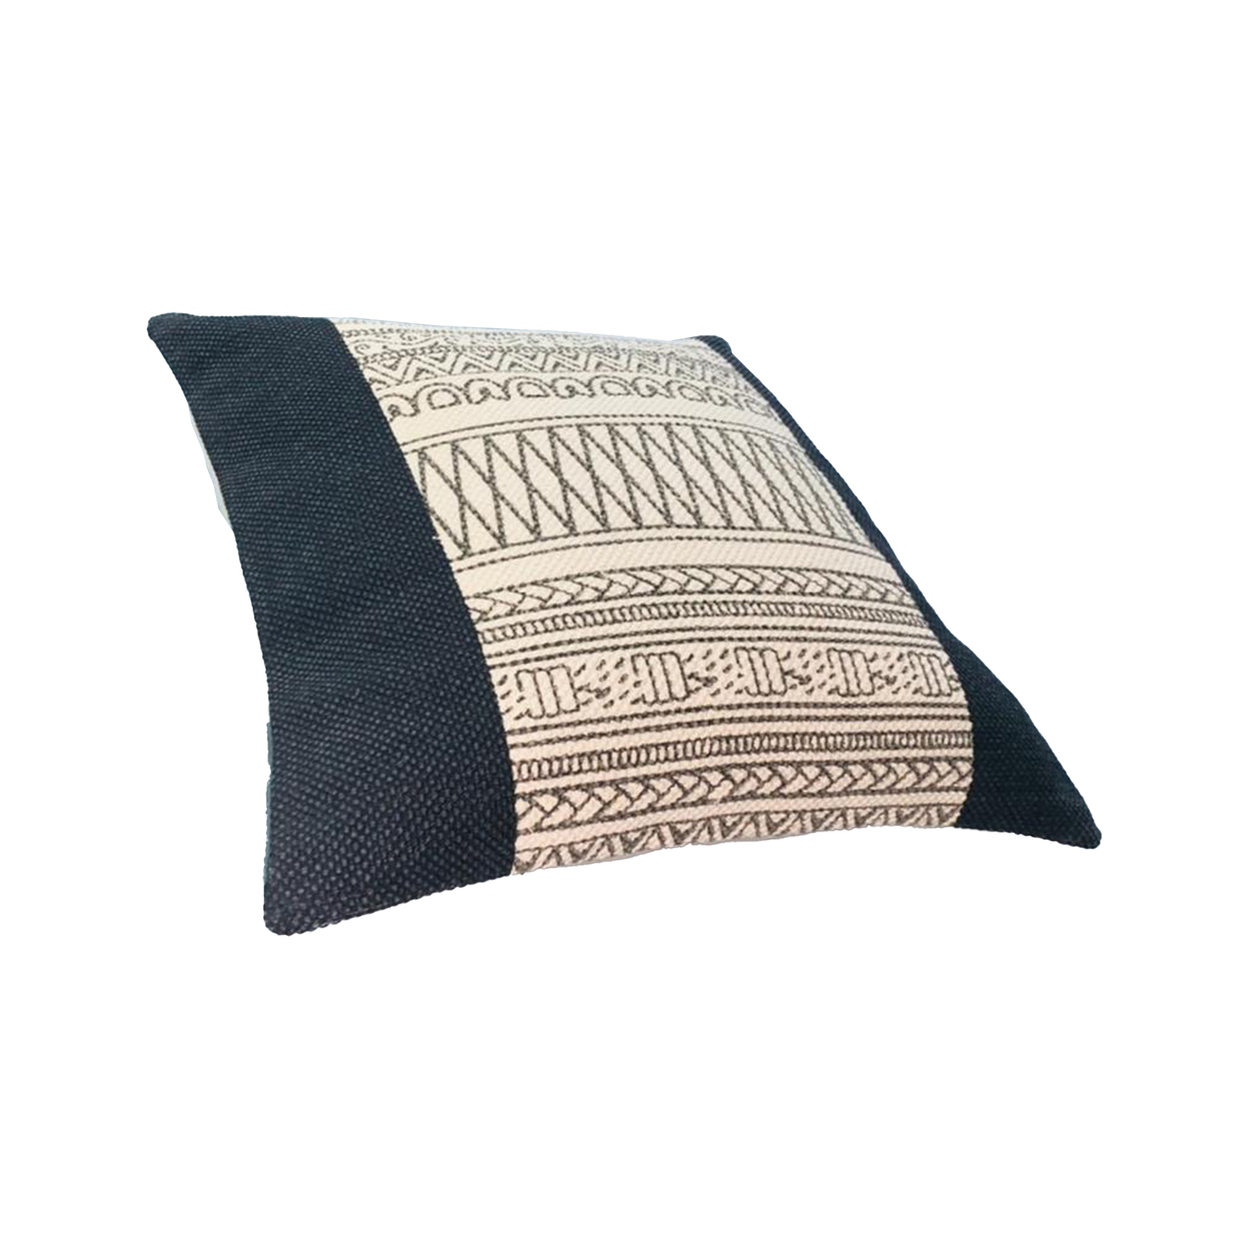 18 X 18 Square Cotton Accent Throw Pillows, Aztec Linework Pattern, Set Of 2, Off White, Black